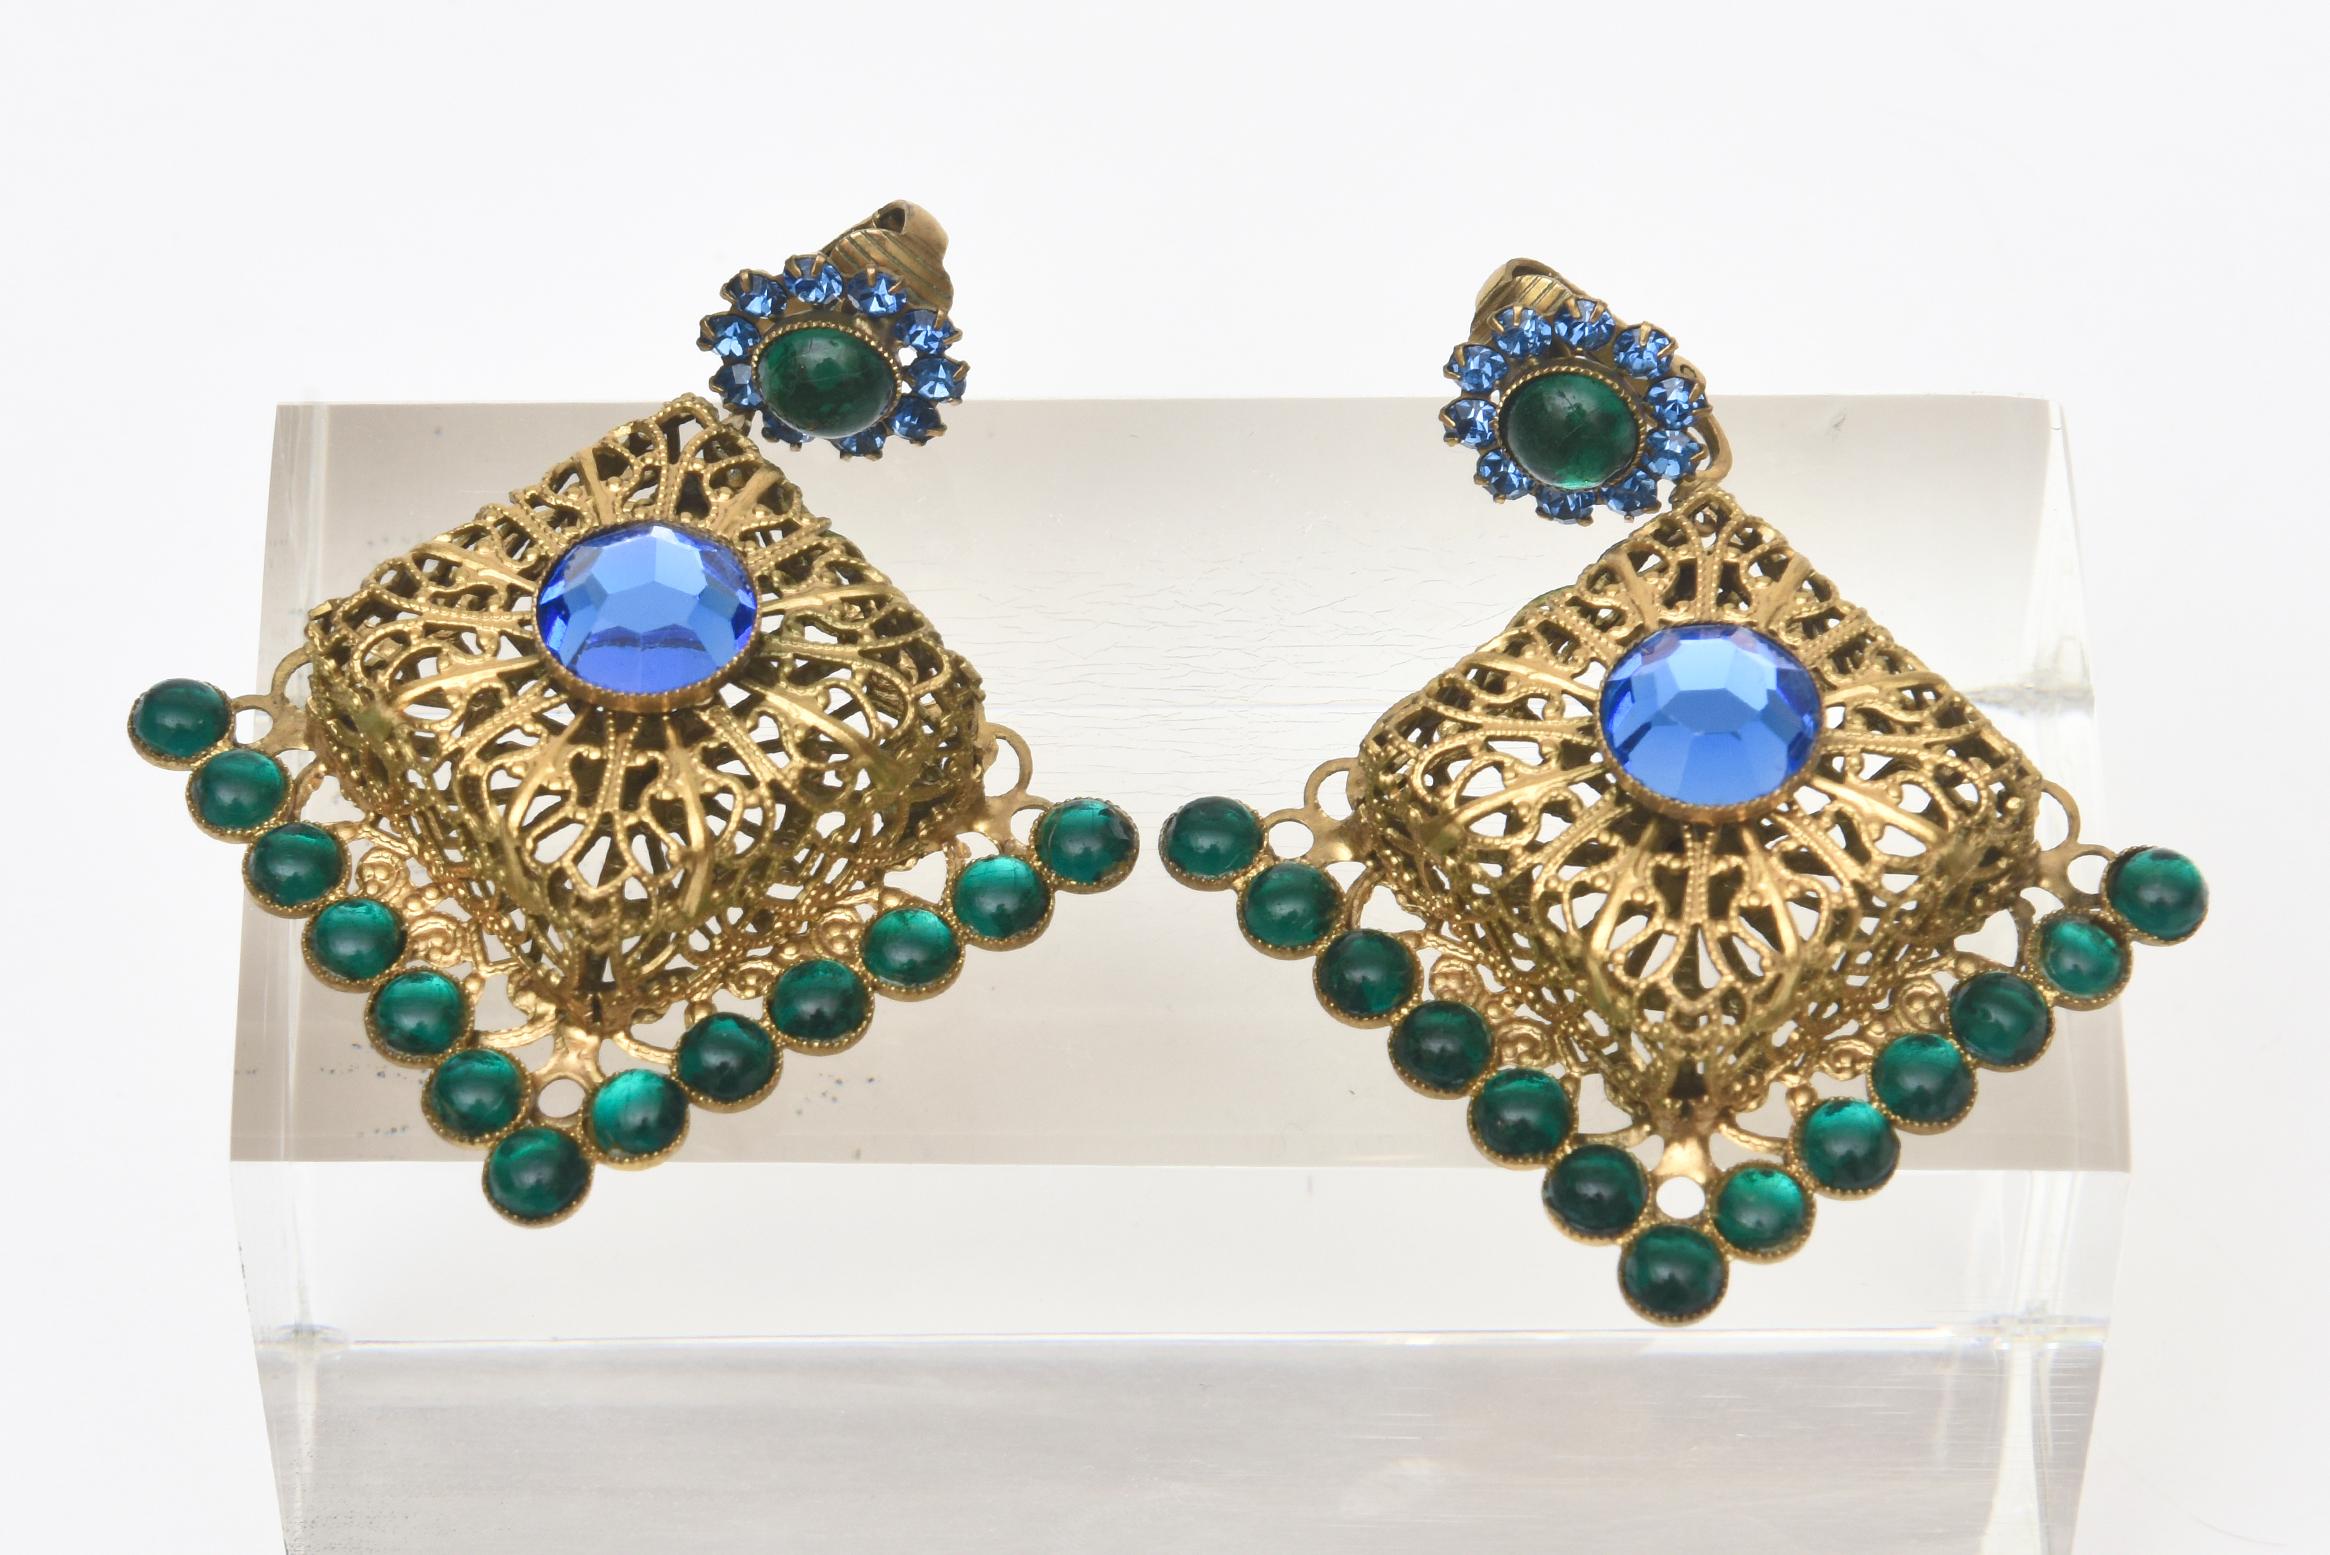 These pair of amazing and dramatic vintage signed obscure early Hattie Carnegie clip on multi colored jewel toned dangle chandelier earrings are an eye catcher on the ear lobes. Greens and blues join together against beautiful gold gilt filigree